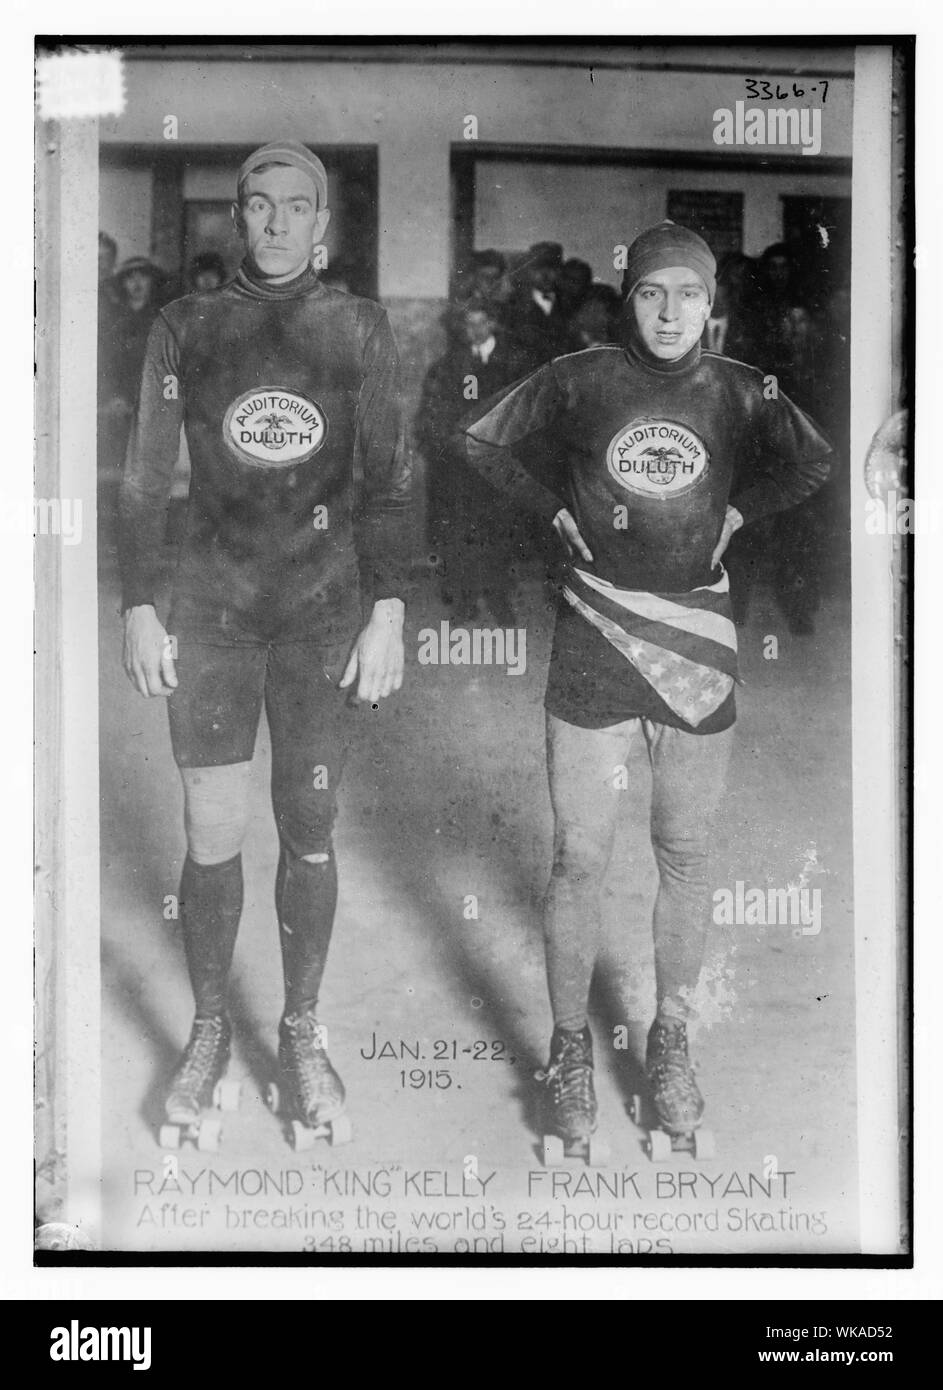 Jan. 21-22, 1915 -- Raymond King Kelly, Frank Bryant -- After breaking the World's 24 hour record skating 348 miles and 8 laps on the ice -- Duluth Stock Photo